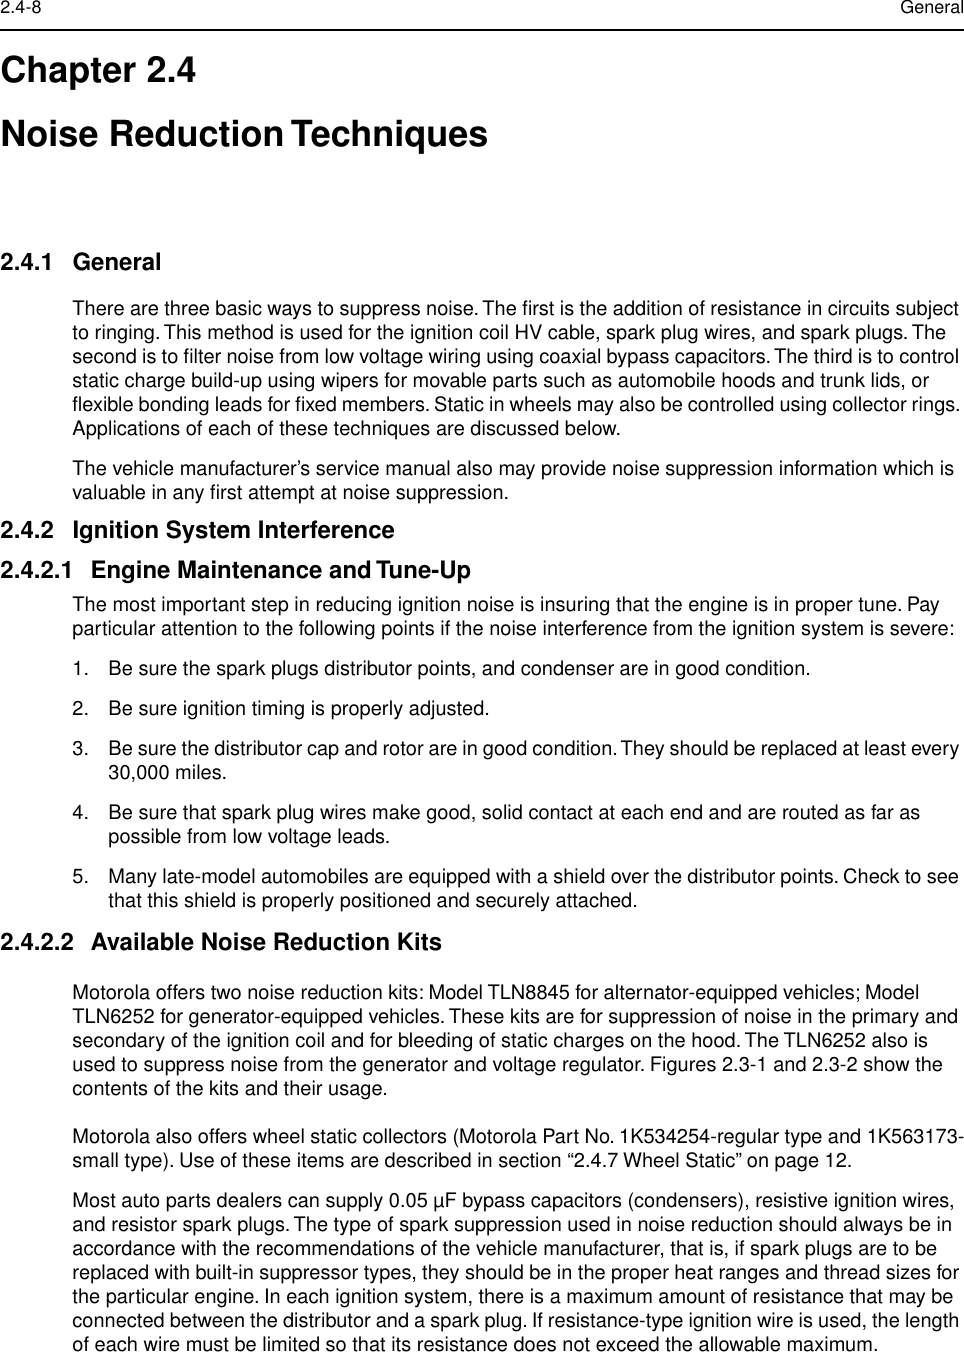  2.4-8 General Chapter 2.4Noise Reduction Techniques 2.4.1 General There are three basic ways to suppress noise. The ﬁrst is the addition of resistance in circuits subject to ringing. This method is used for the ignition coil HV cable, spark plug wires, and spark plugs. The second is to ﬁlter noise from low voltage wiring using coaxial bypass capacitors. The third is to control static charge build-up using wipers for movable parts such as automobile hoods and trunk lids, or ﬂexible bonding leads for ﬁxed members. Static in wheels may also be controlled using collector rings. Applications of each of these techniques are discussed below.The vehicle manufacturer’s service manual also may provide noise suppression information which is valuable in any ﬁrst attempt at noise suppression. 2.4.2 Ignition System Interference2.4.2.1 Engine Maintenance and Tune-Up The most important step in reducing ignition noise is insuring that the engine is in proper tune. Pay particular attention to the following points if the noise interference from the ignition system is severe:1. Be sure the spark plugs distributor points, and condenser are in good condition.2. Be sure ignition timing is properly adjusted.3. Be sure the distributor cap and rotor are in good condition. They should be replaced at least every 30,000 miles.4. Be sure that spark plug wires make good, solid contact at each end and are routed as far as possible from low voltage leads.5. Many late-model automobiles are equipped with a shield over the distributor points. Check to see that this shield is properly positioned and securely attached. 2.4.2.2 Available Noise Reduction Kits Motorola offers two noise reduction kits: Model TLN8845 for alternator-equipped vehicles; Model TLN6252 for generator-equipped vehicles. These kits are for suppression of noise in the primary and secondary of the ignition coil and for bleeding of static charges on the hood. The TLN6252 also is used to suppress noise from the generator and voltage regulator. Figures 2.3-1 and 2.3-2 show the contents of the kits and their usage.Motorola also offers wheel static collectors (Motorola Part No. 1K534254-regular type and 1K563173-small type). Use of these items are described in section “2.4.7 Wheel Static” on page 12.Most auto parts dealers can supply 0.05 µF bypass capacitors (condensers), resistive ignition wires, and resistor spark plugs. The type of spark suppression used in noise reduction should always be in accordance with the recommendations of the vehicle manufacturer, that is, if spark plugs are to be replaced with built-in suppressor types, they should be in the proper heat ranges and thread sizes for the particular engine. In each ignition system, there is a maximum amount of resistance that may be connected between the distributor and a spark plug. If resistance-type ignition wire is used, the length of each wire must be limited so that its resistance does not exceed the allowable maximum.